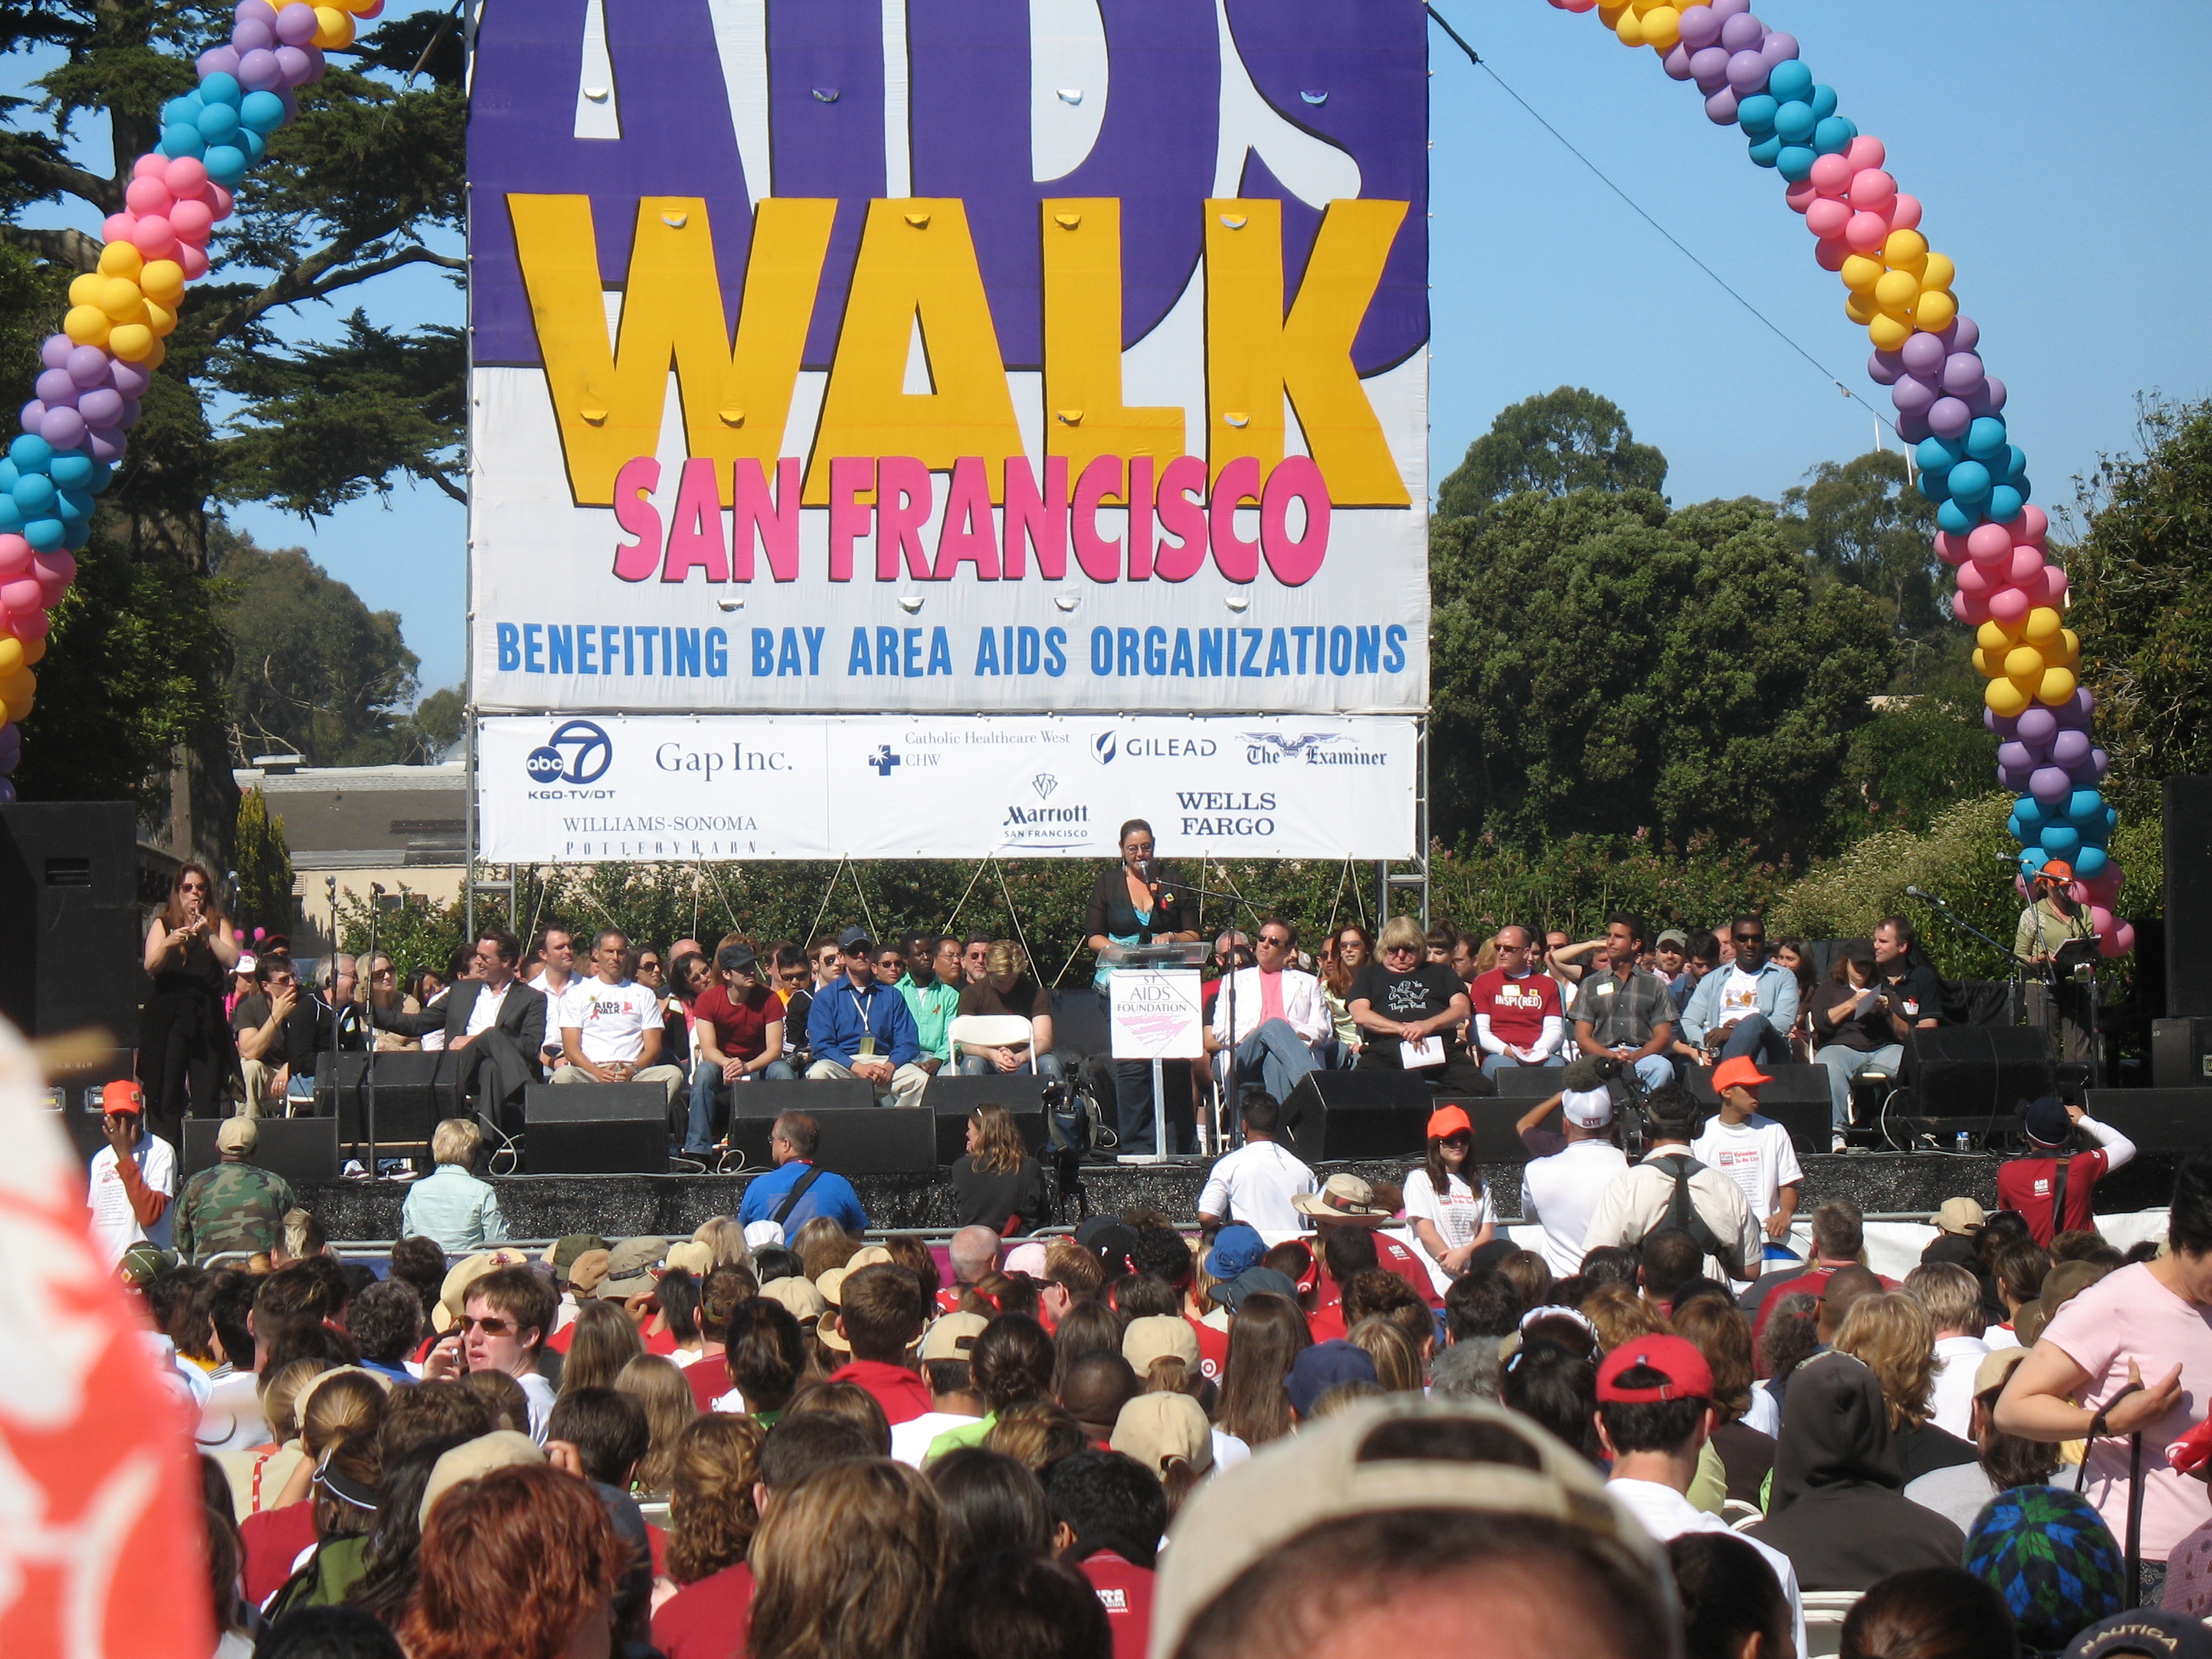 The 29th annual AIDS Walk San Francisco takes place this Sunday, July 18, at Golden Gate Park.